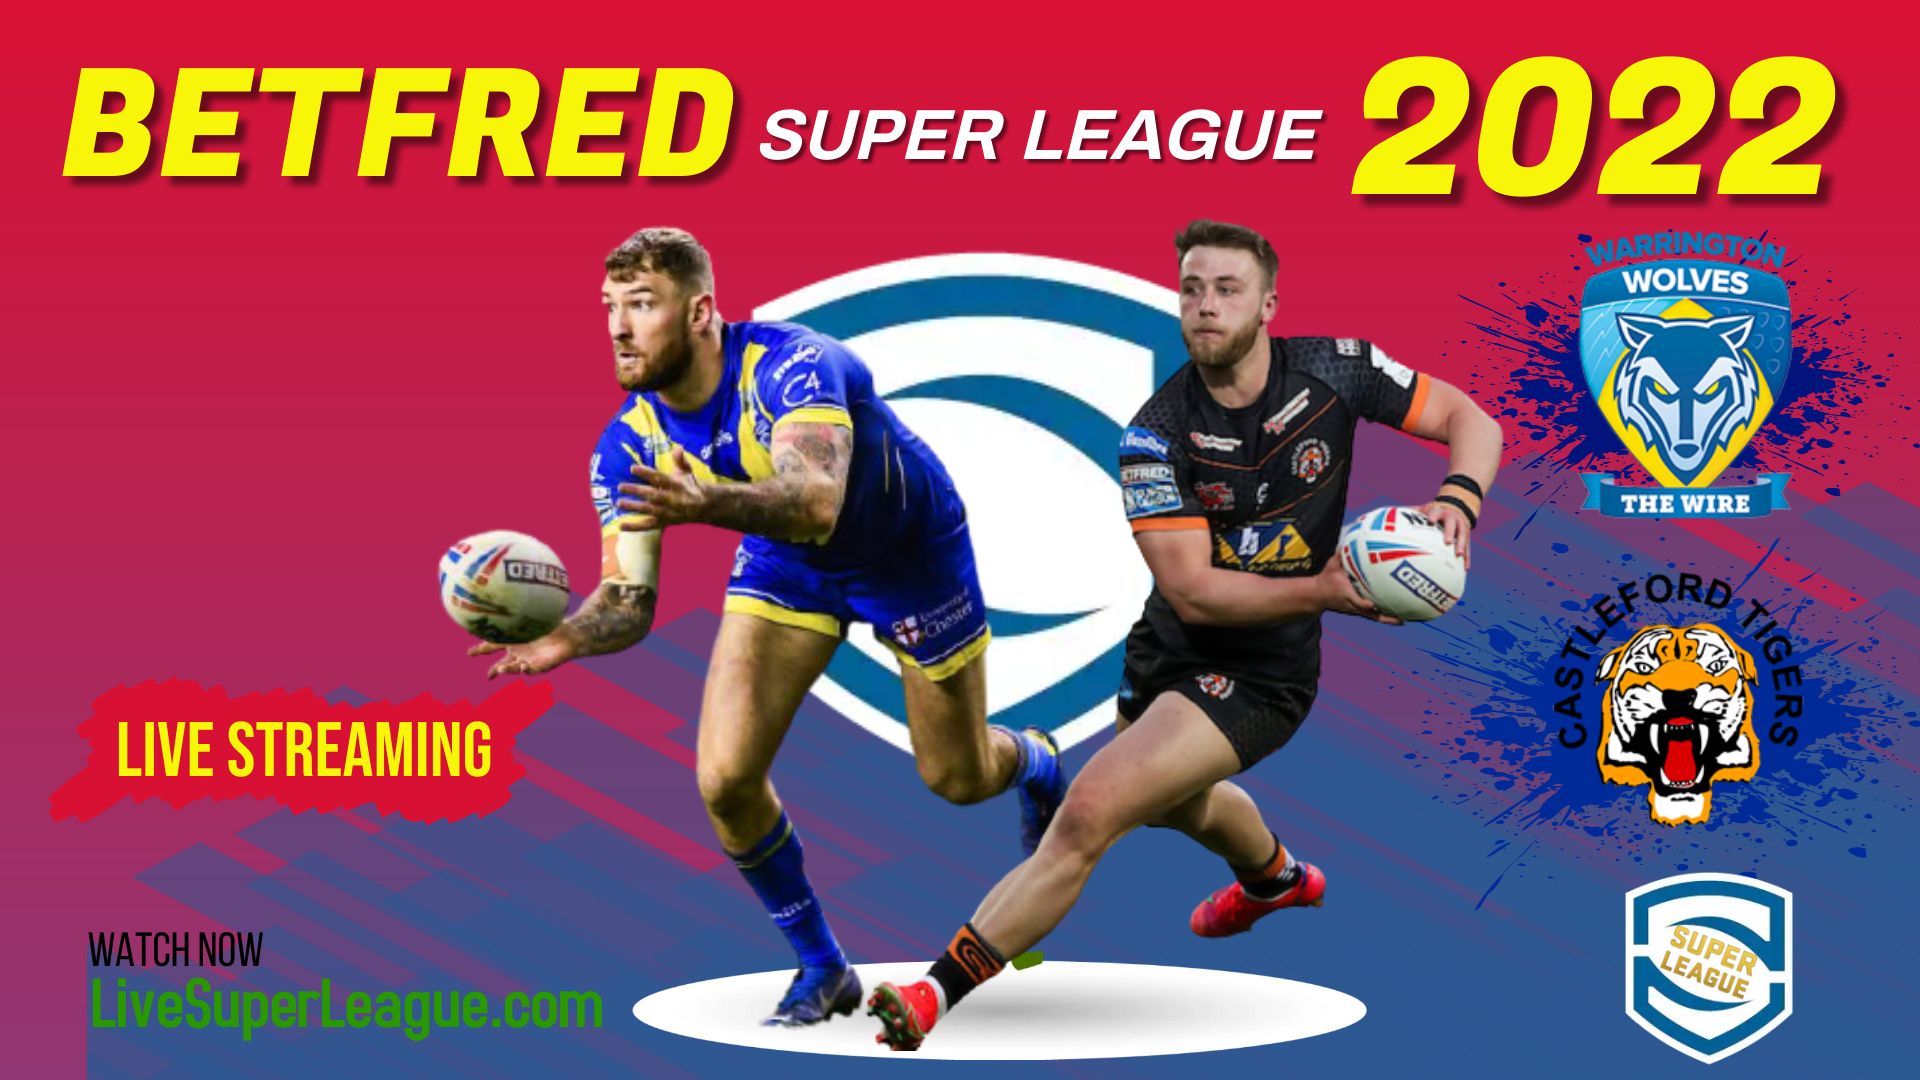 Warrington Wolves Vs Castleford Tigers RD 25 Live Stream 2022 | Full Match Replay